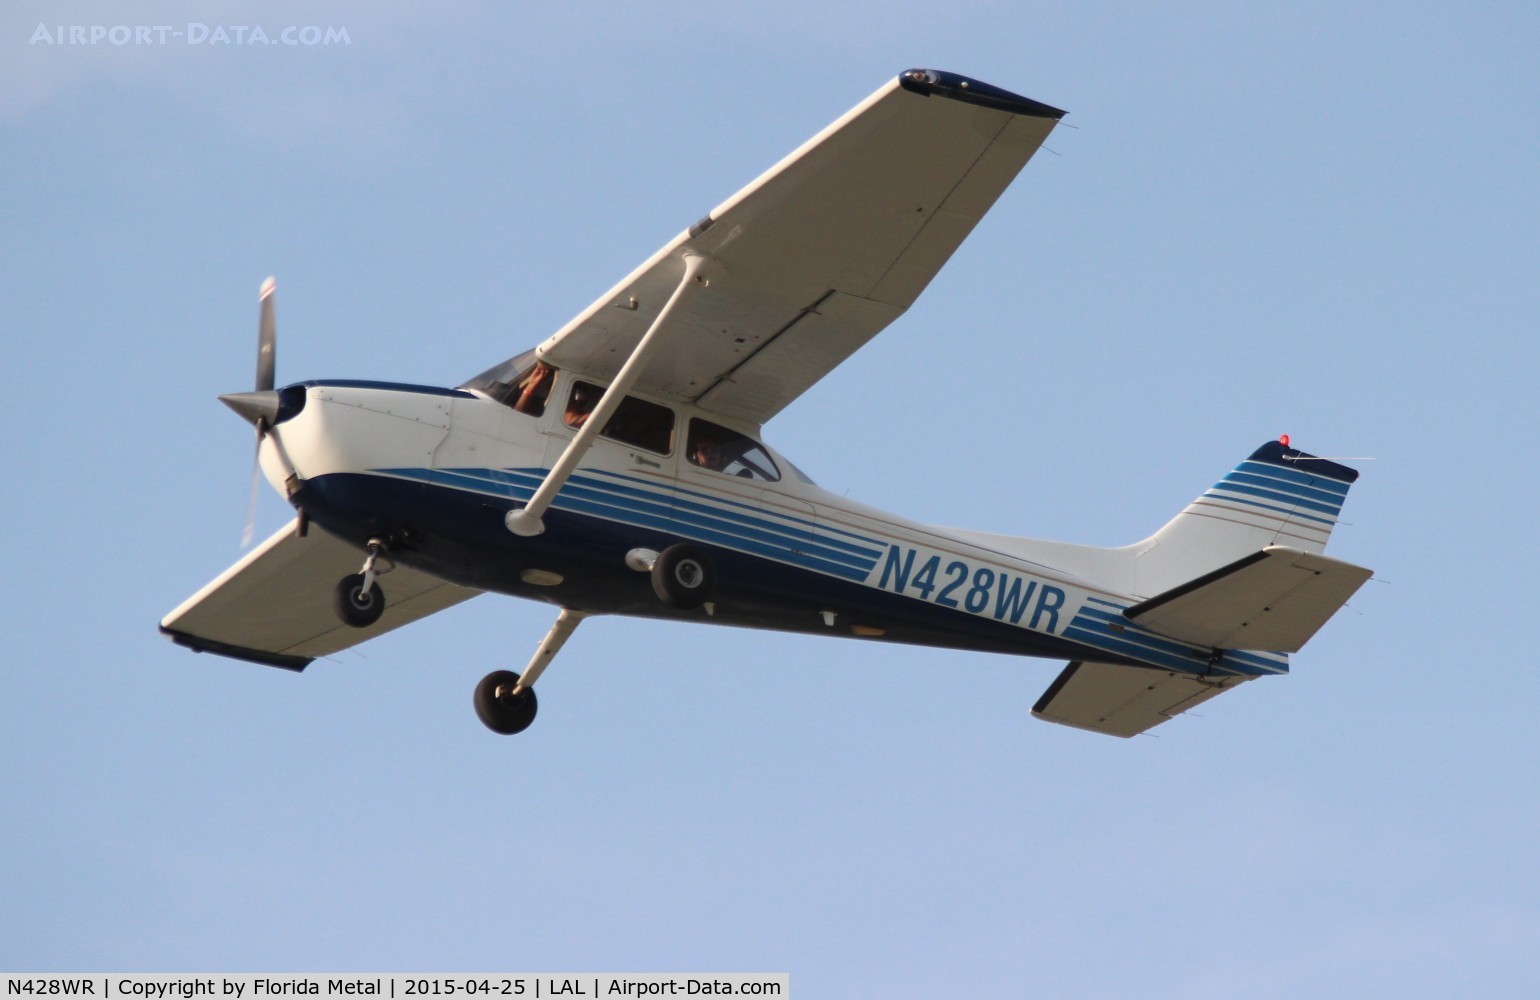 N428WR, 2005 Cessna 172S C/N 172S10058, Embry Riddle